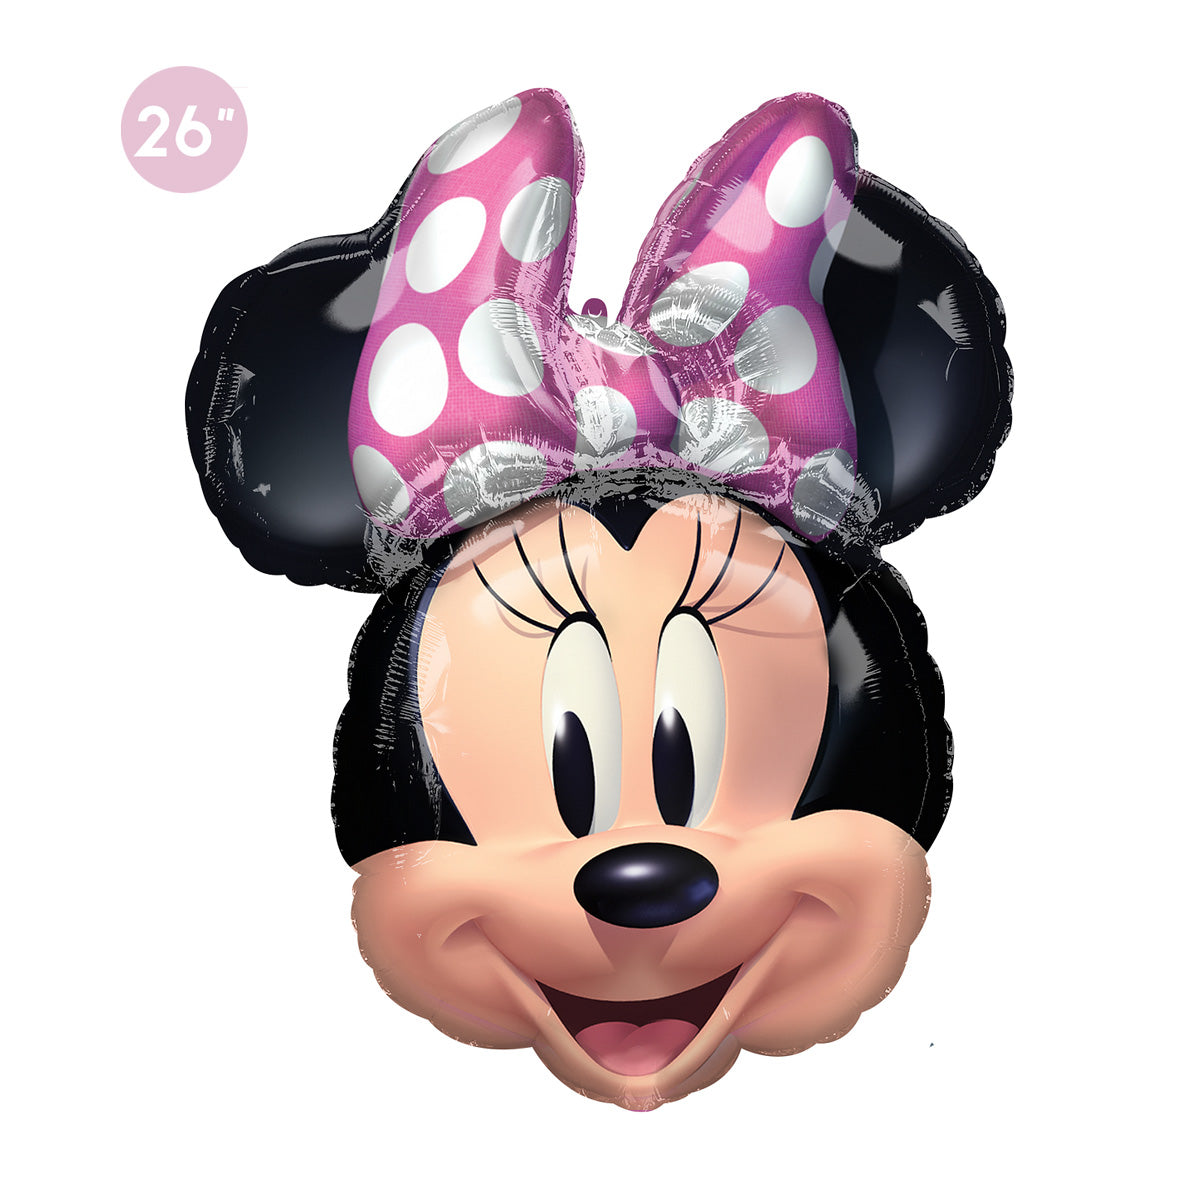 Minnie Mouse Head Balloon GenWoo Shop Minnie Mouse Girls Birthday Party Decorations